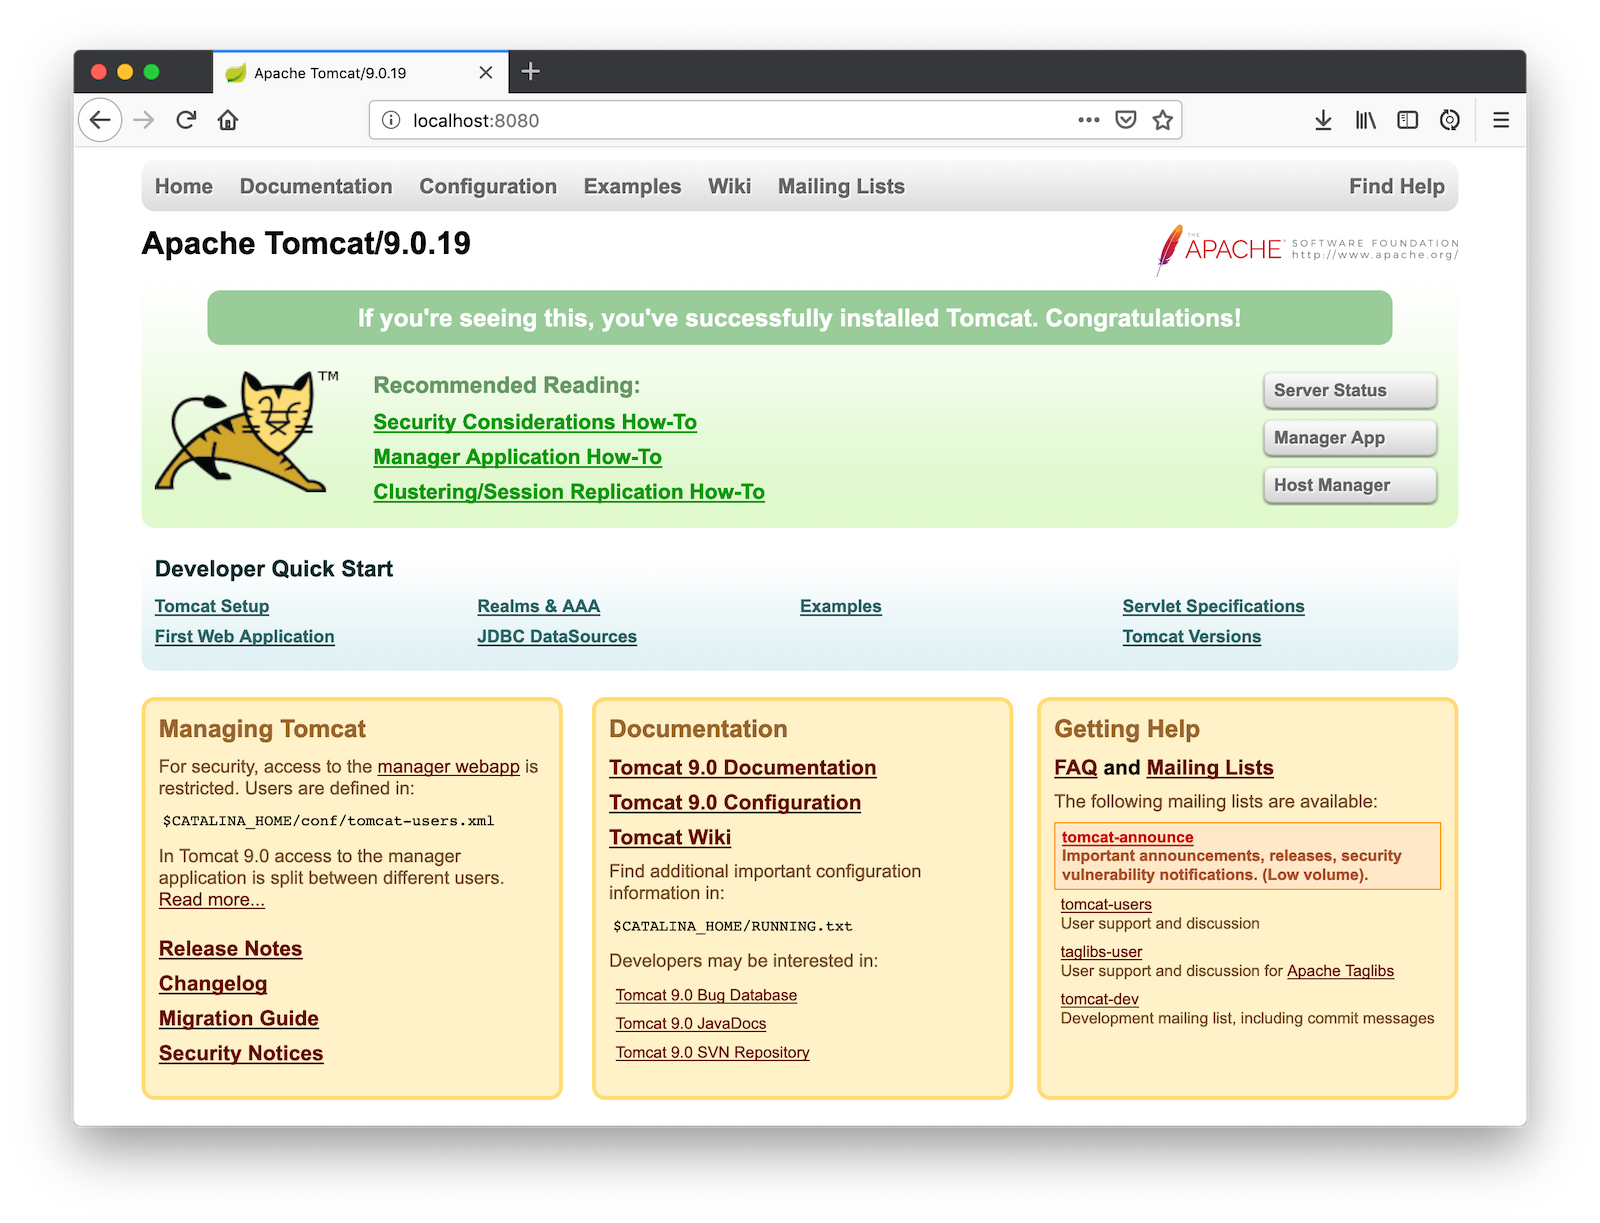 Spring Boot Application into Tomcat 